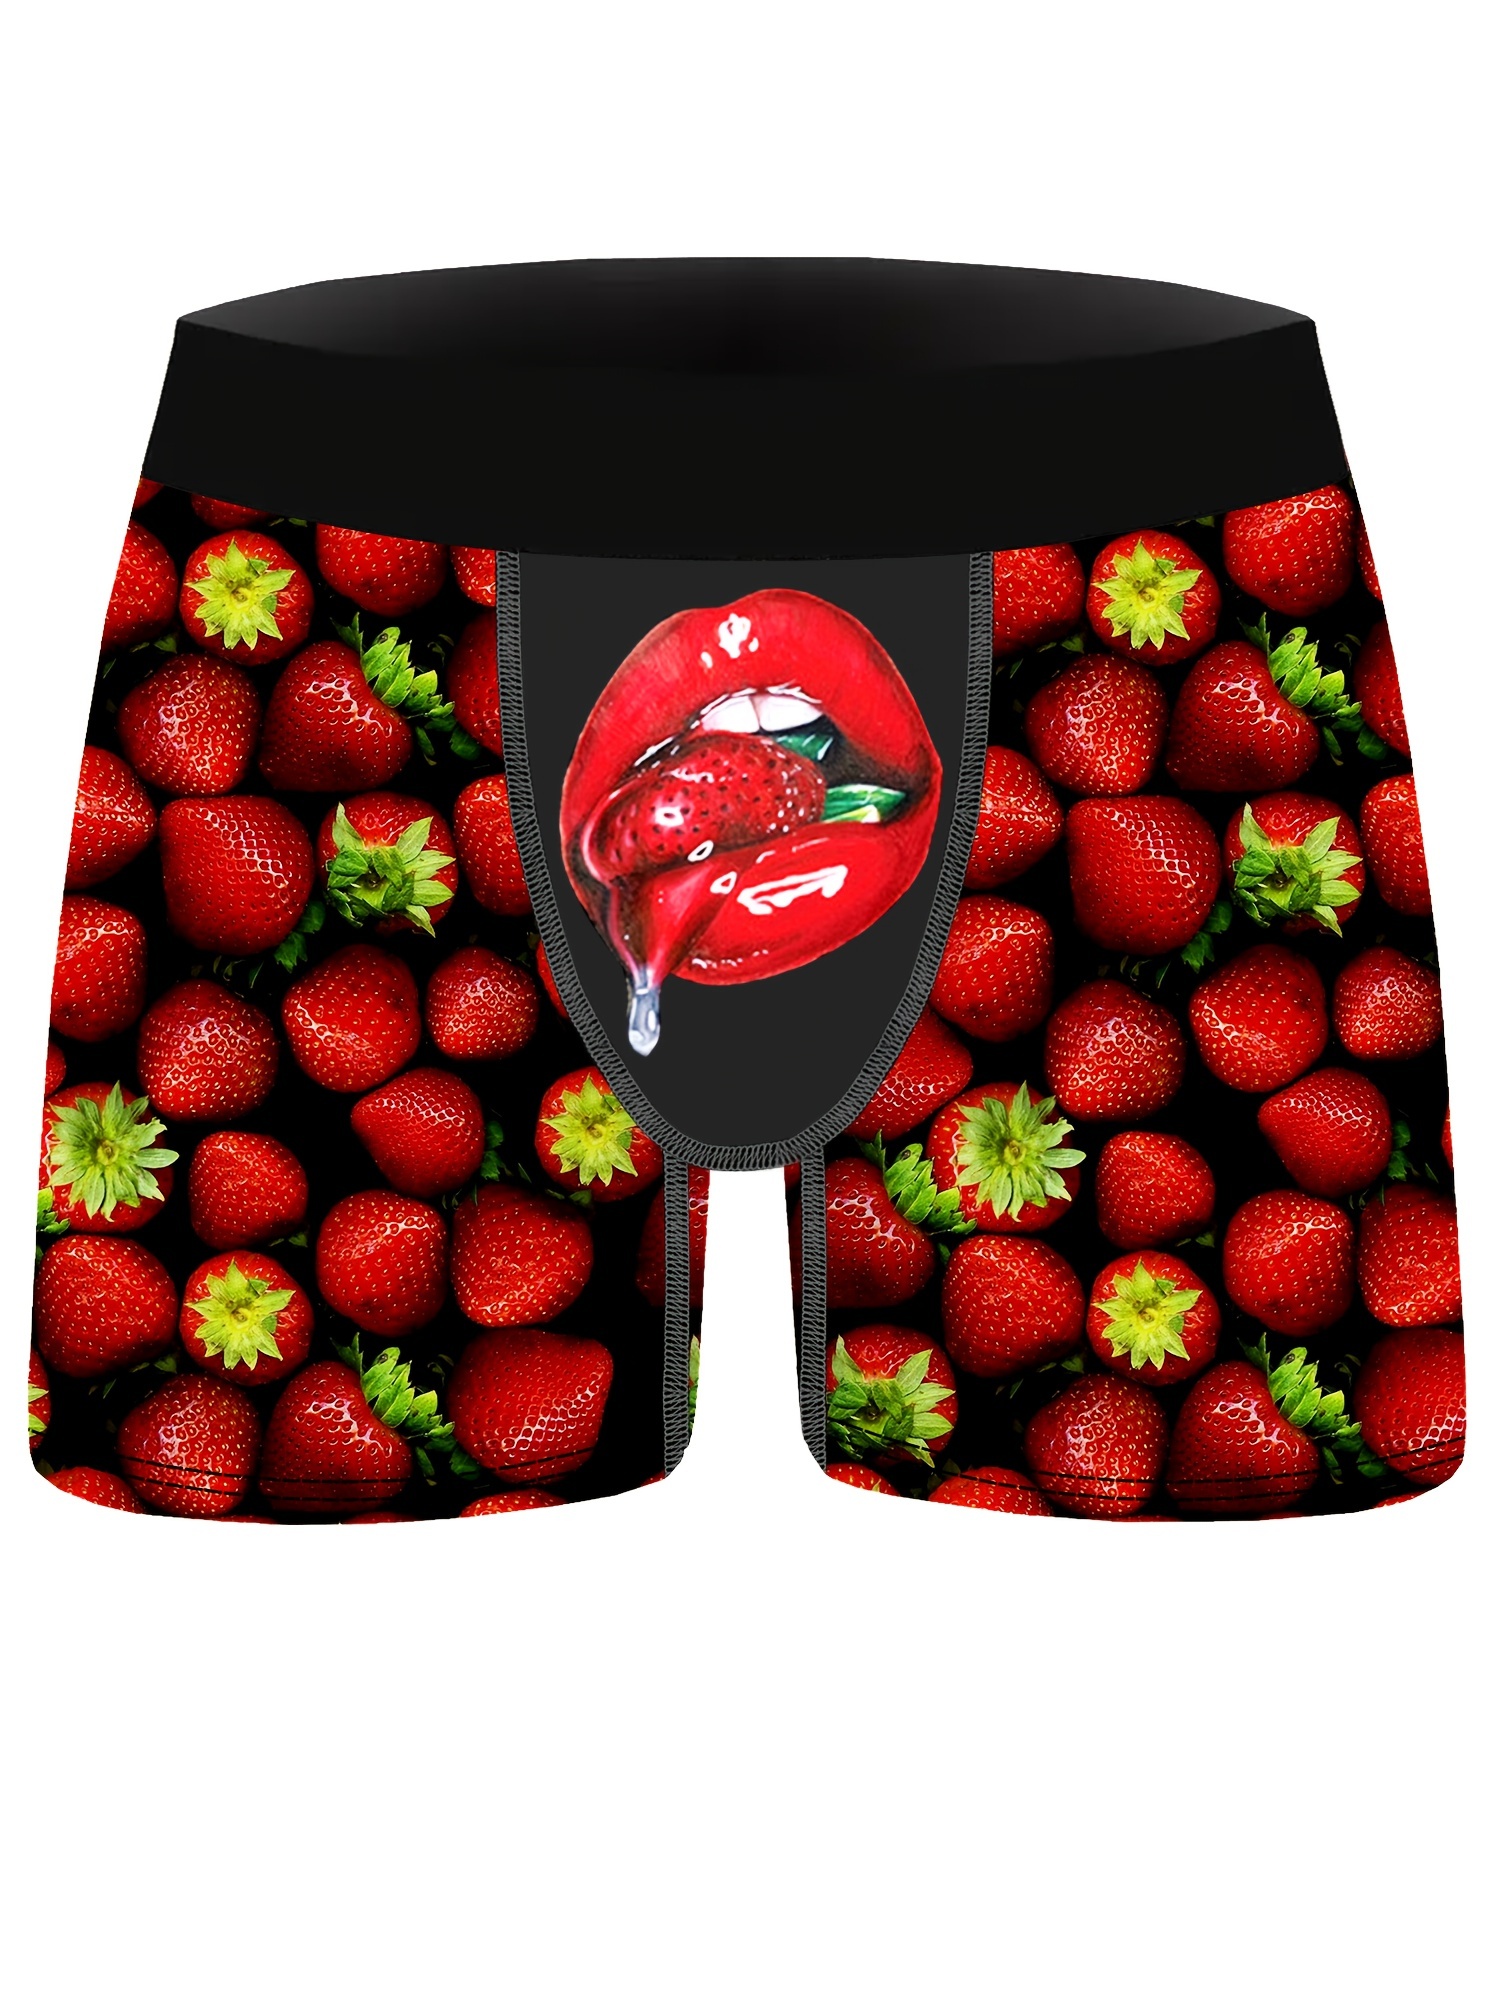 King Edible Undies for Men - Strawberry Chocolate